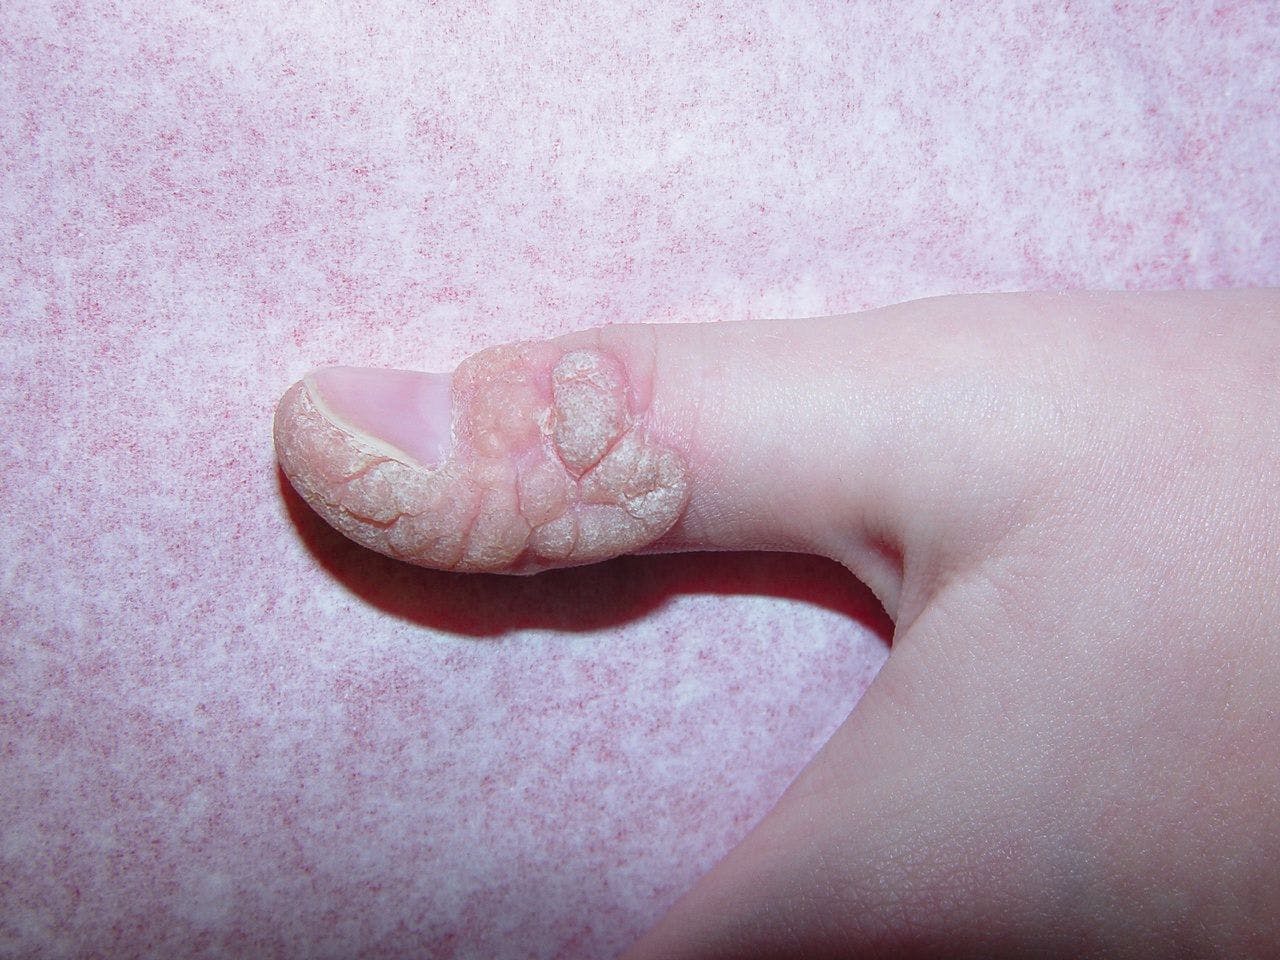 Koebner wart after combination Cantharidin